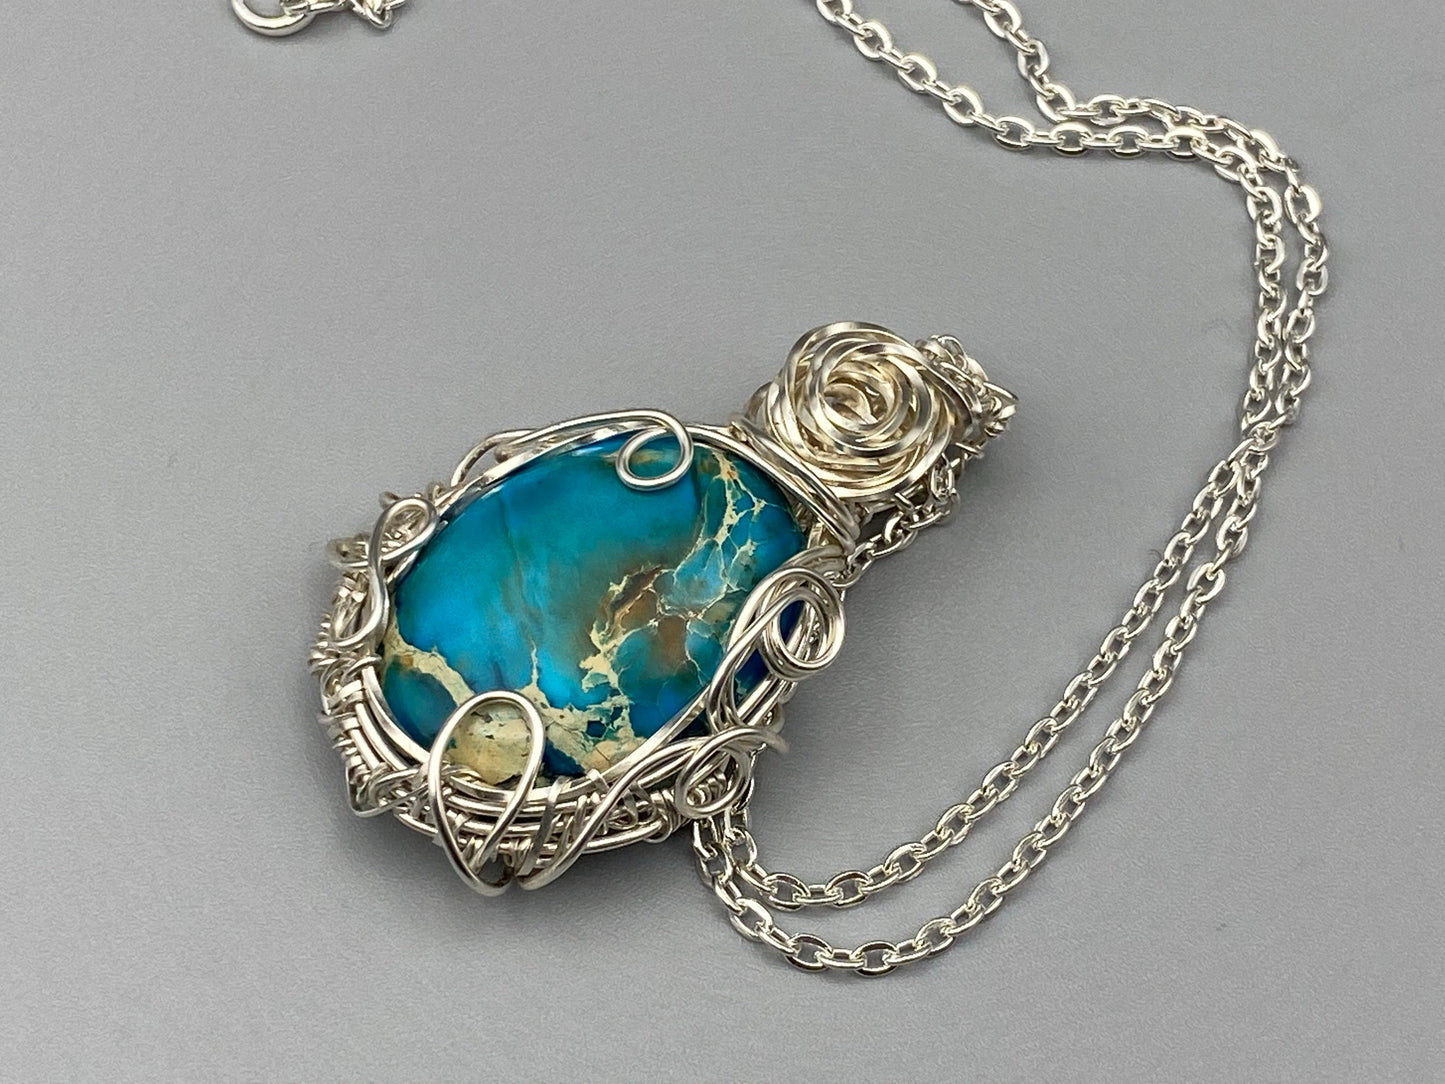 Aqua Oval Wire Wrapped Pendant in Silver Plated Wire